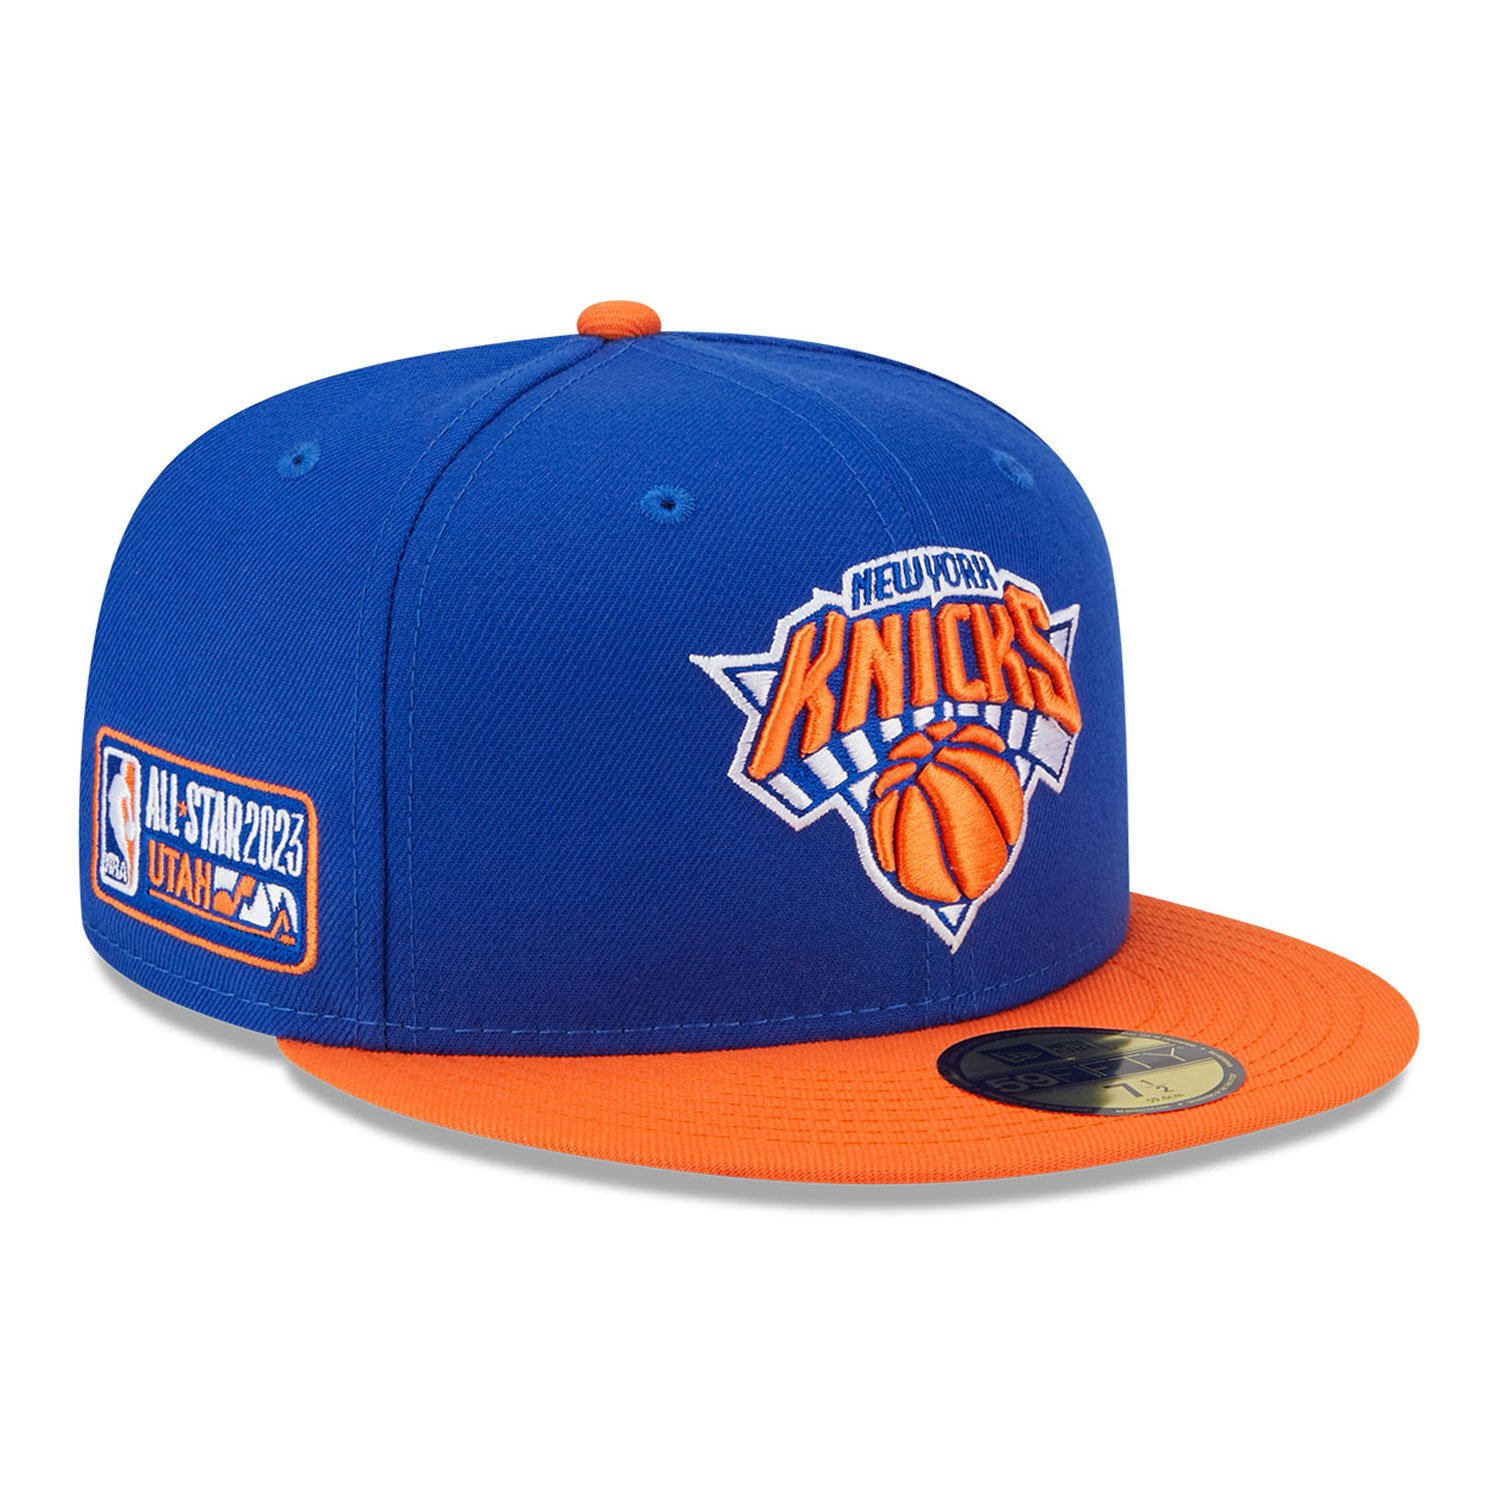 Official New Era NBA All Star Game Blue New York Knicks 59FIFTY Fitted